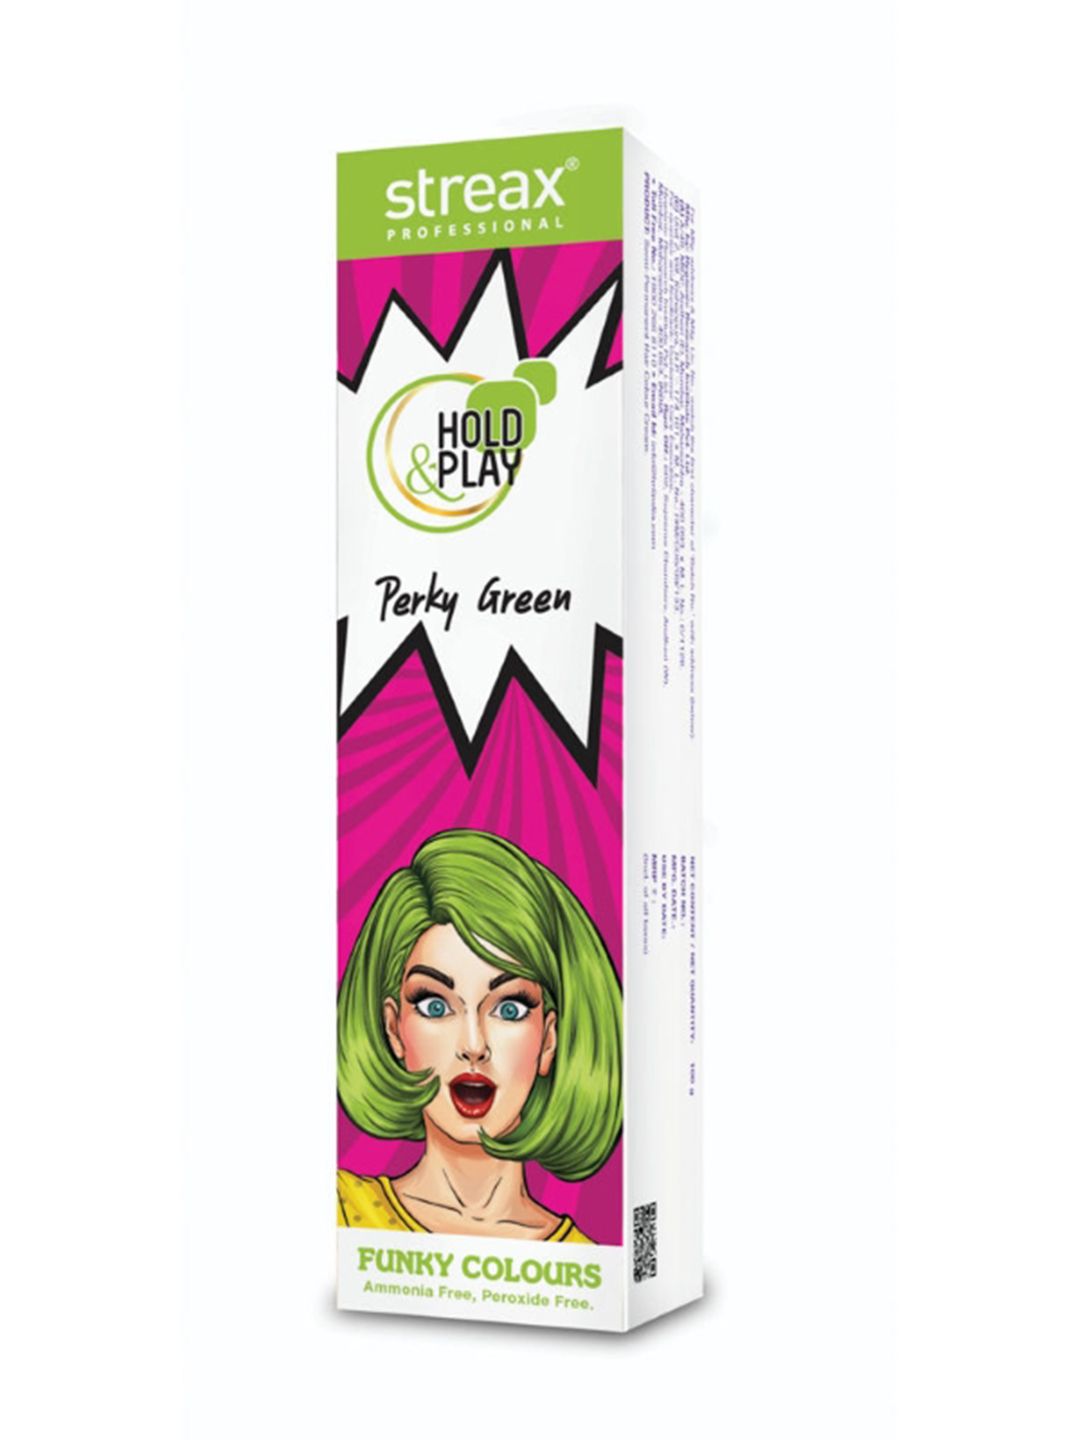 Streax Professional Hold & Play Funky Colours Hair Colour 100 gm - Perky Green Price in India